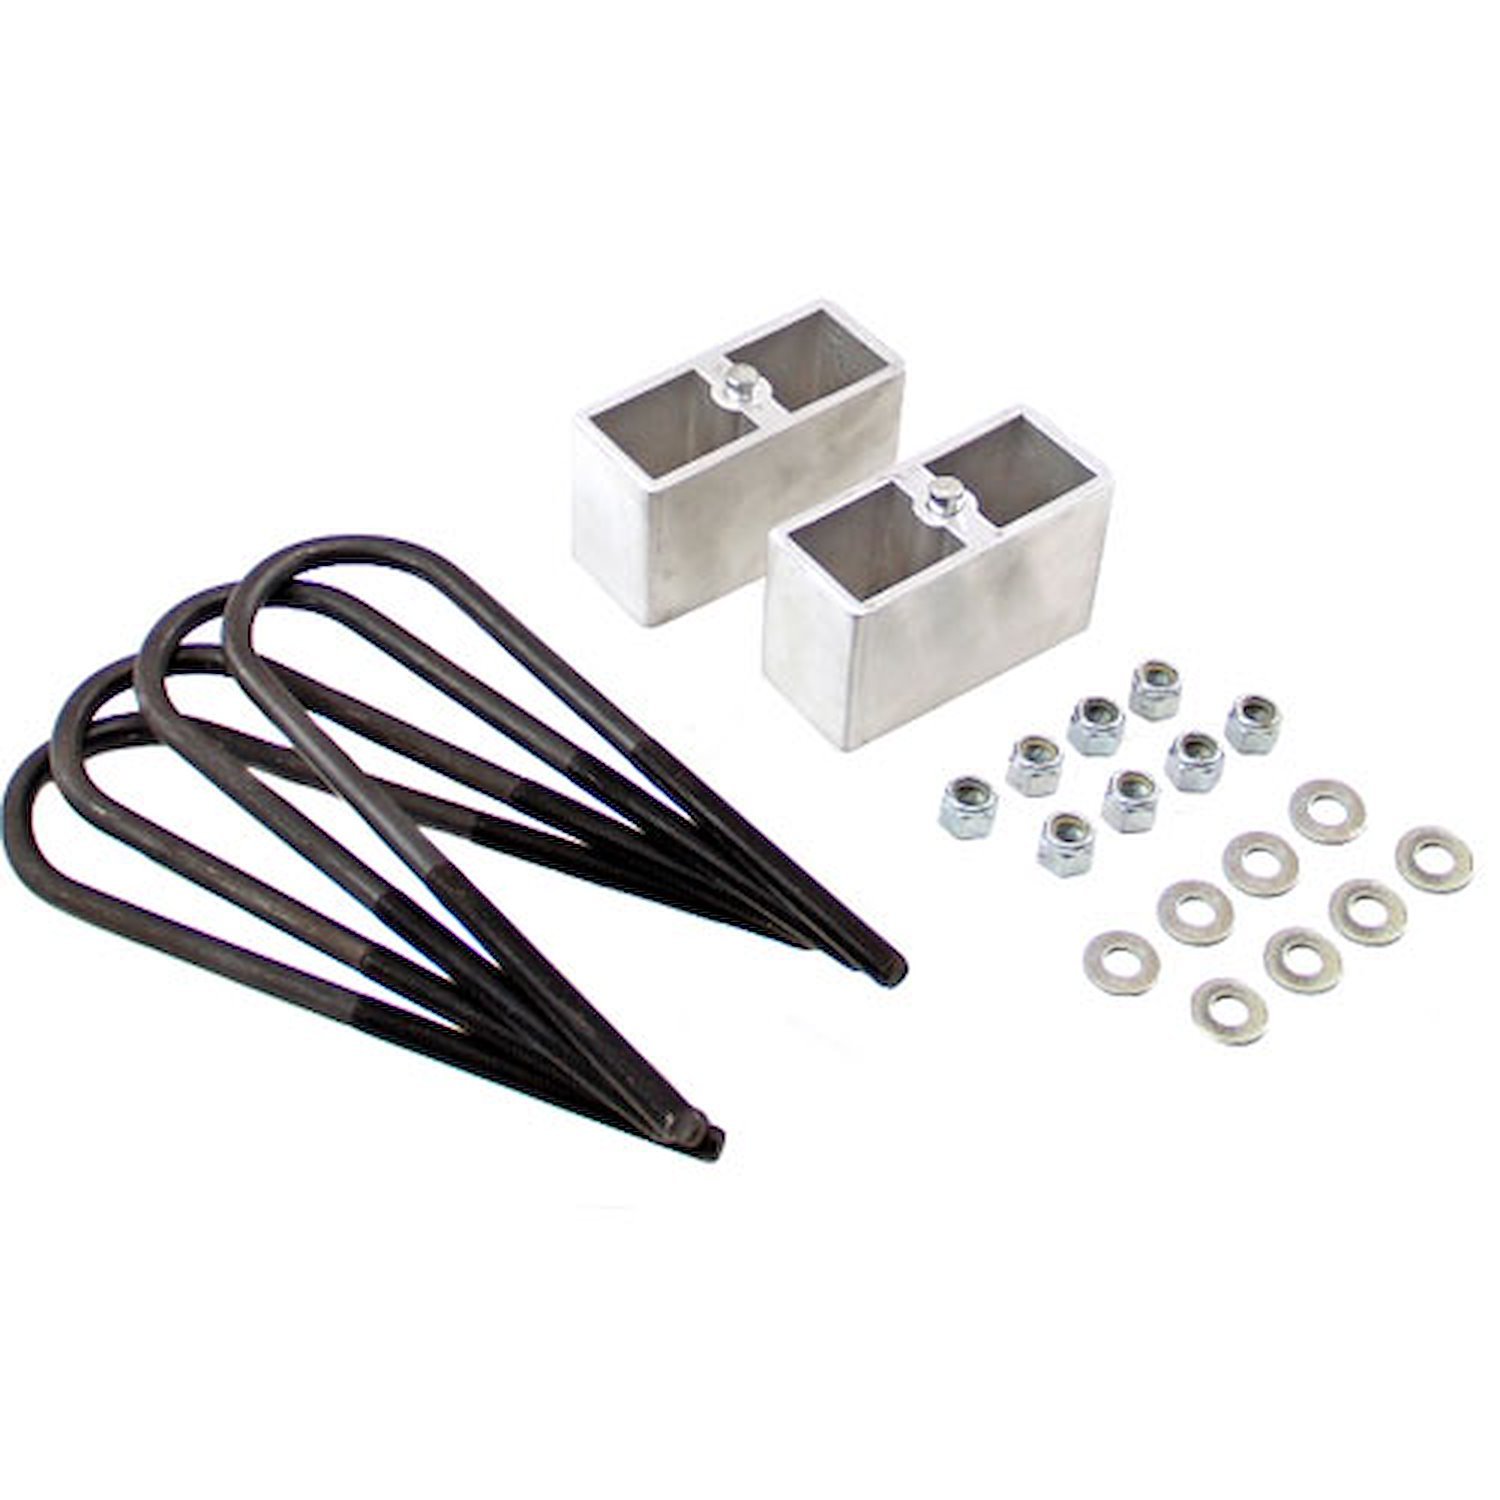 3 Lift And Lowering Kit Aluminum Block With U-Bolts And Hardware